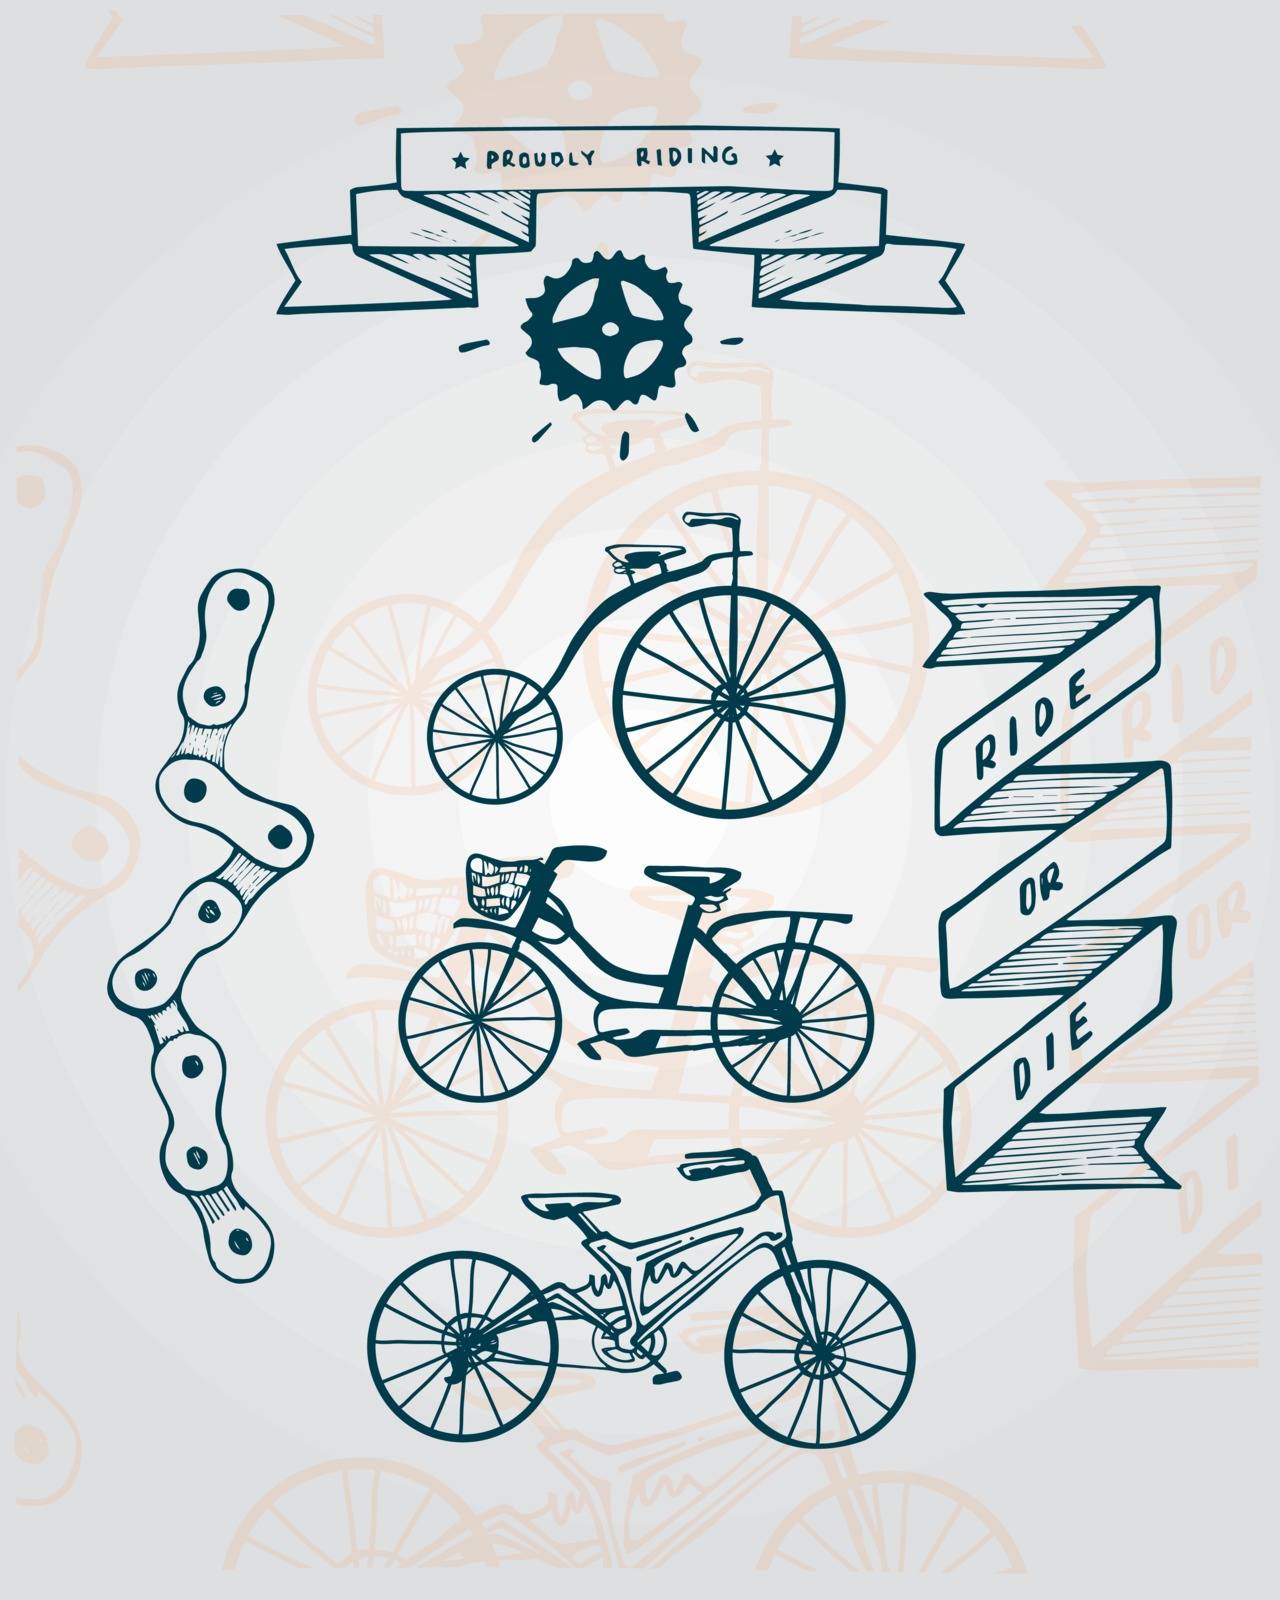 Hand drawn vector illustration or drawing of different bicycle and cycling related items